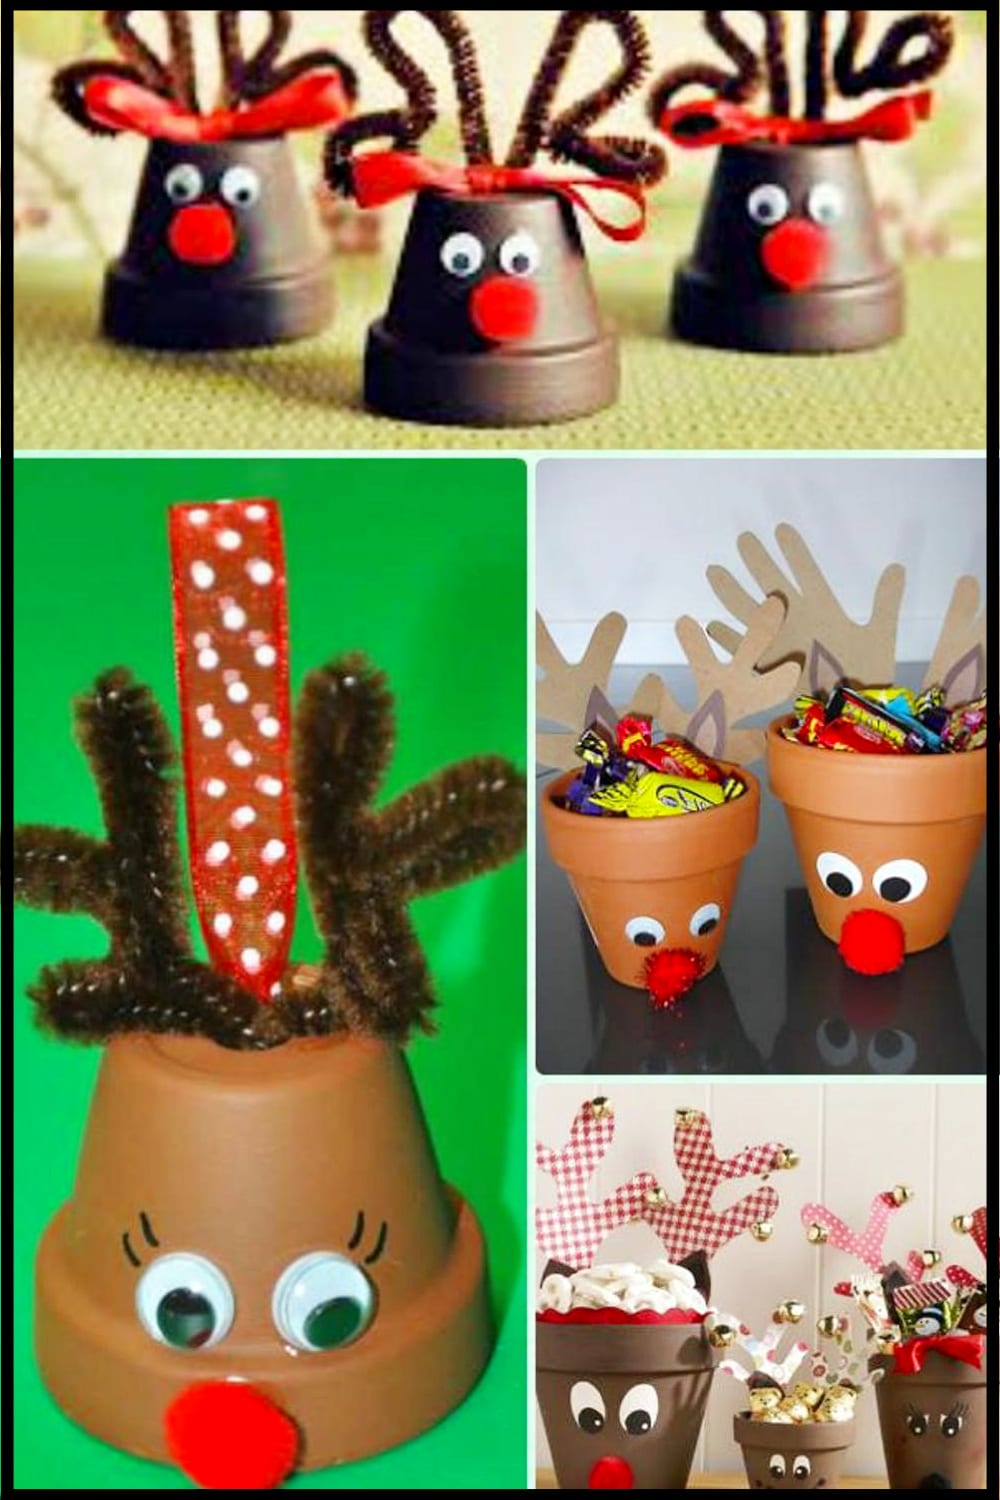 DIY Christmas decor and craft project ideas - clay pots decorated for Christmas